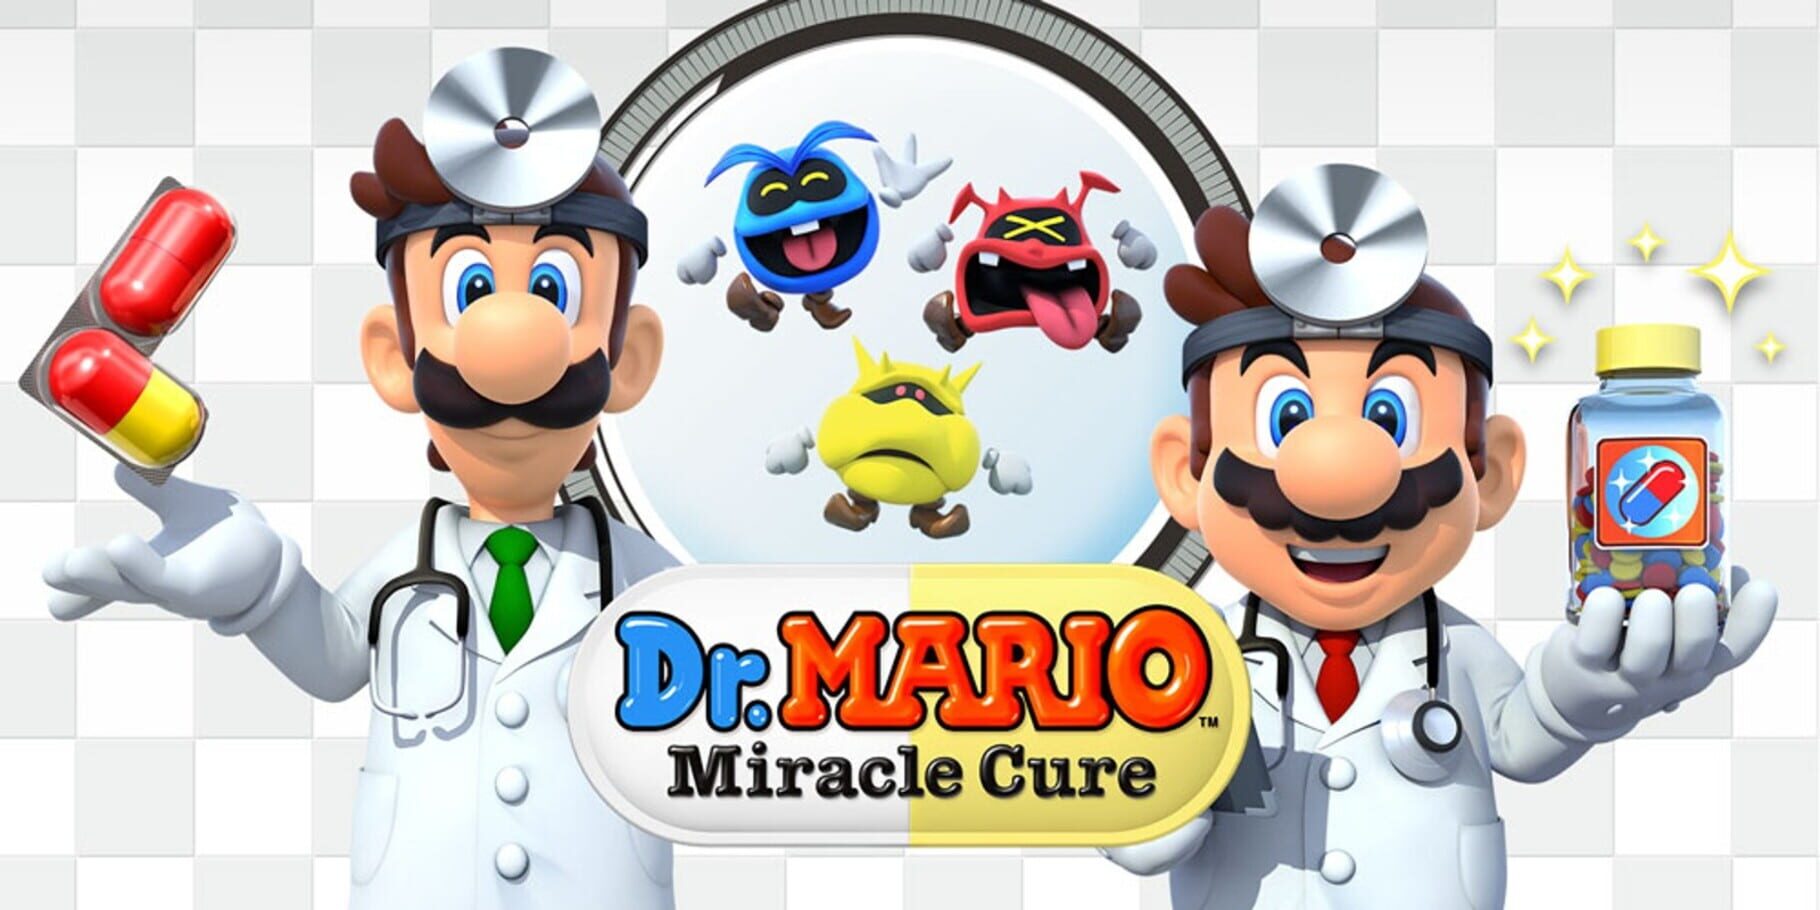 Artwork for Dr. Mario: Miracle Cure